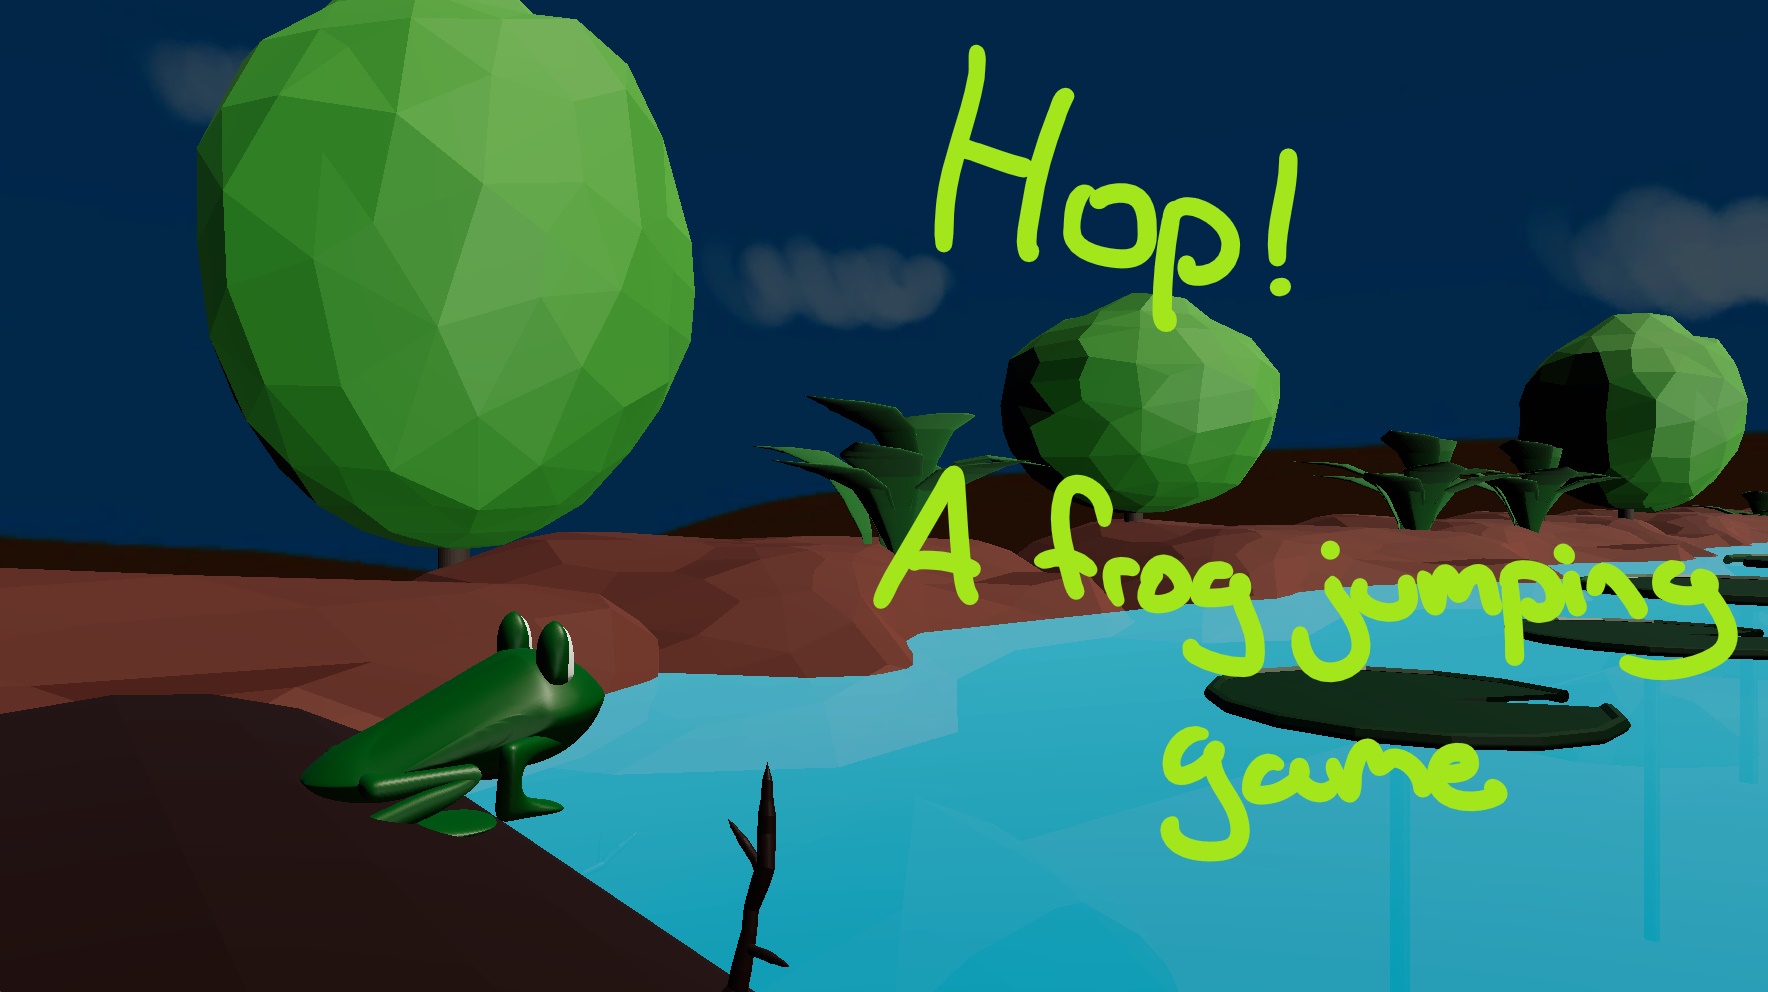 Hop! A frog jumping game